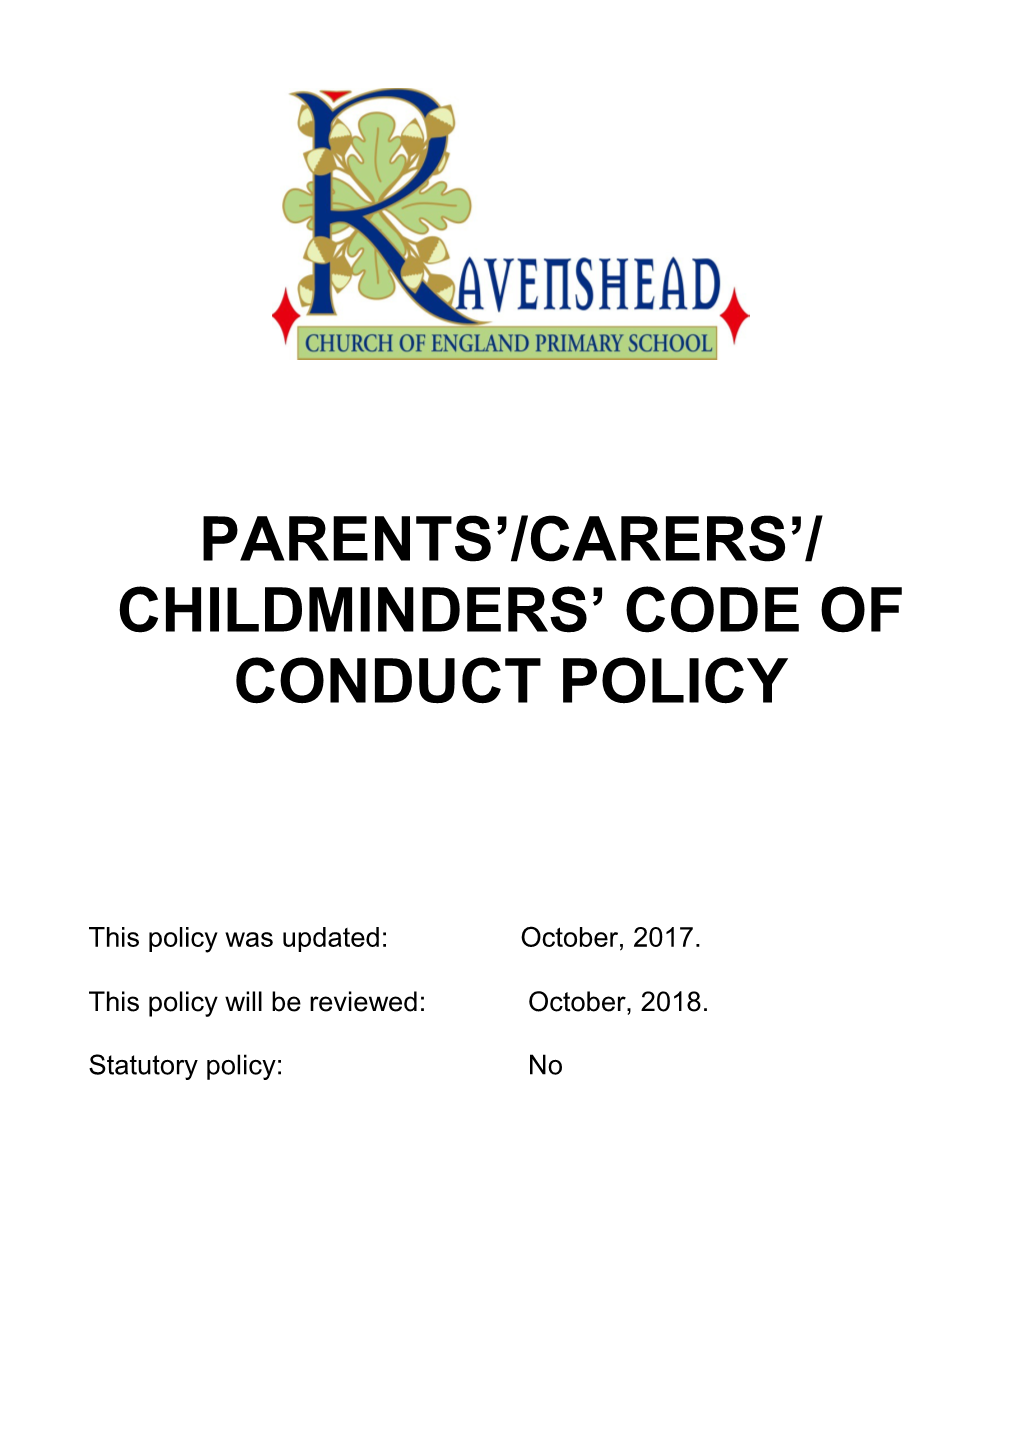 Childminders Code of Conduct Policy